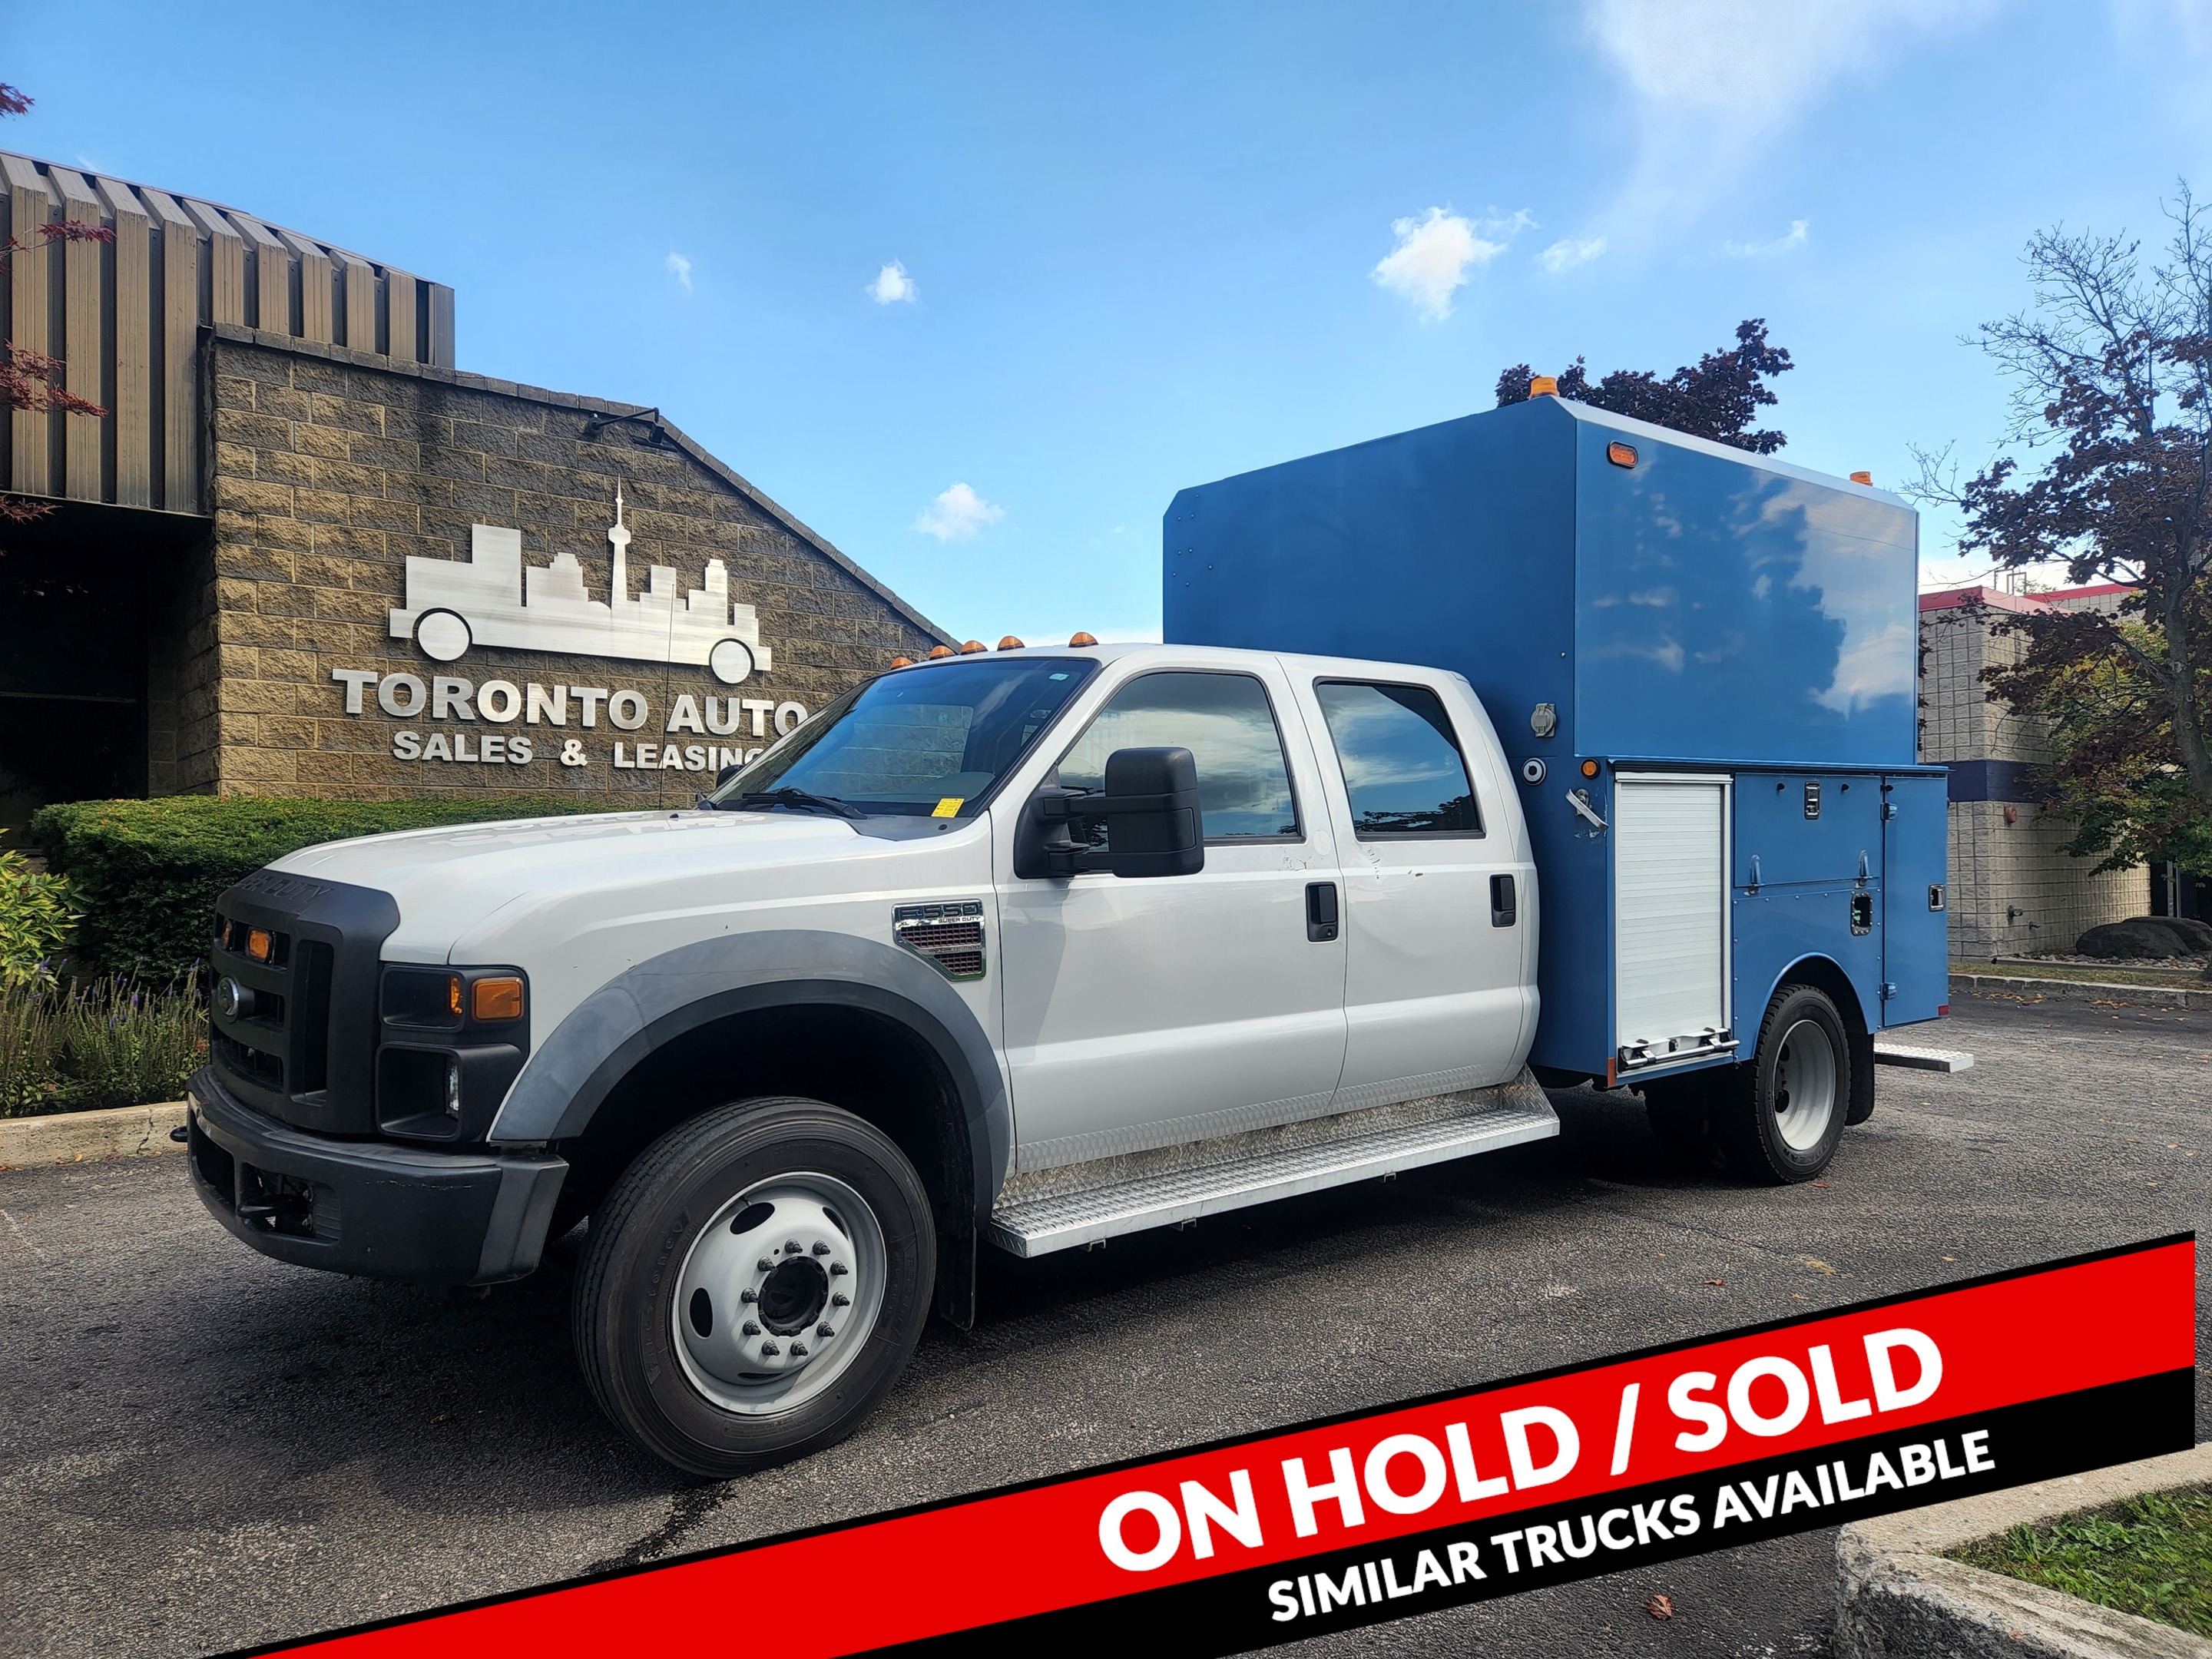 2010 Ford F-550 4X4, Crew Cab, 9' Service Body, ONLY 111,689km